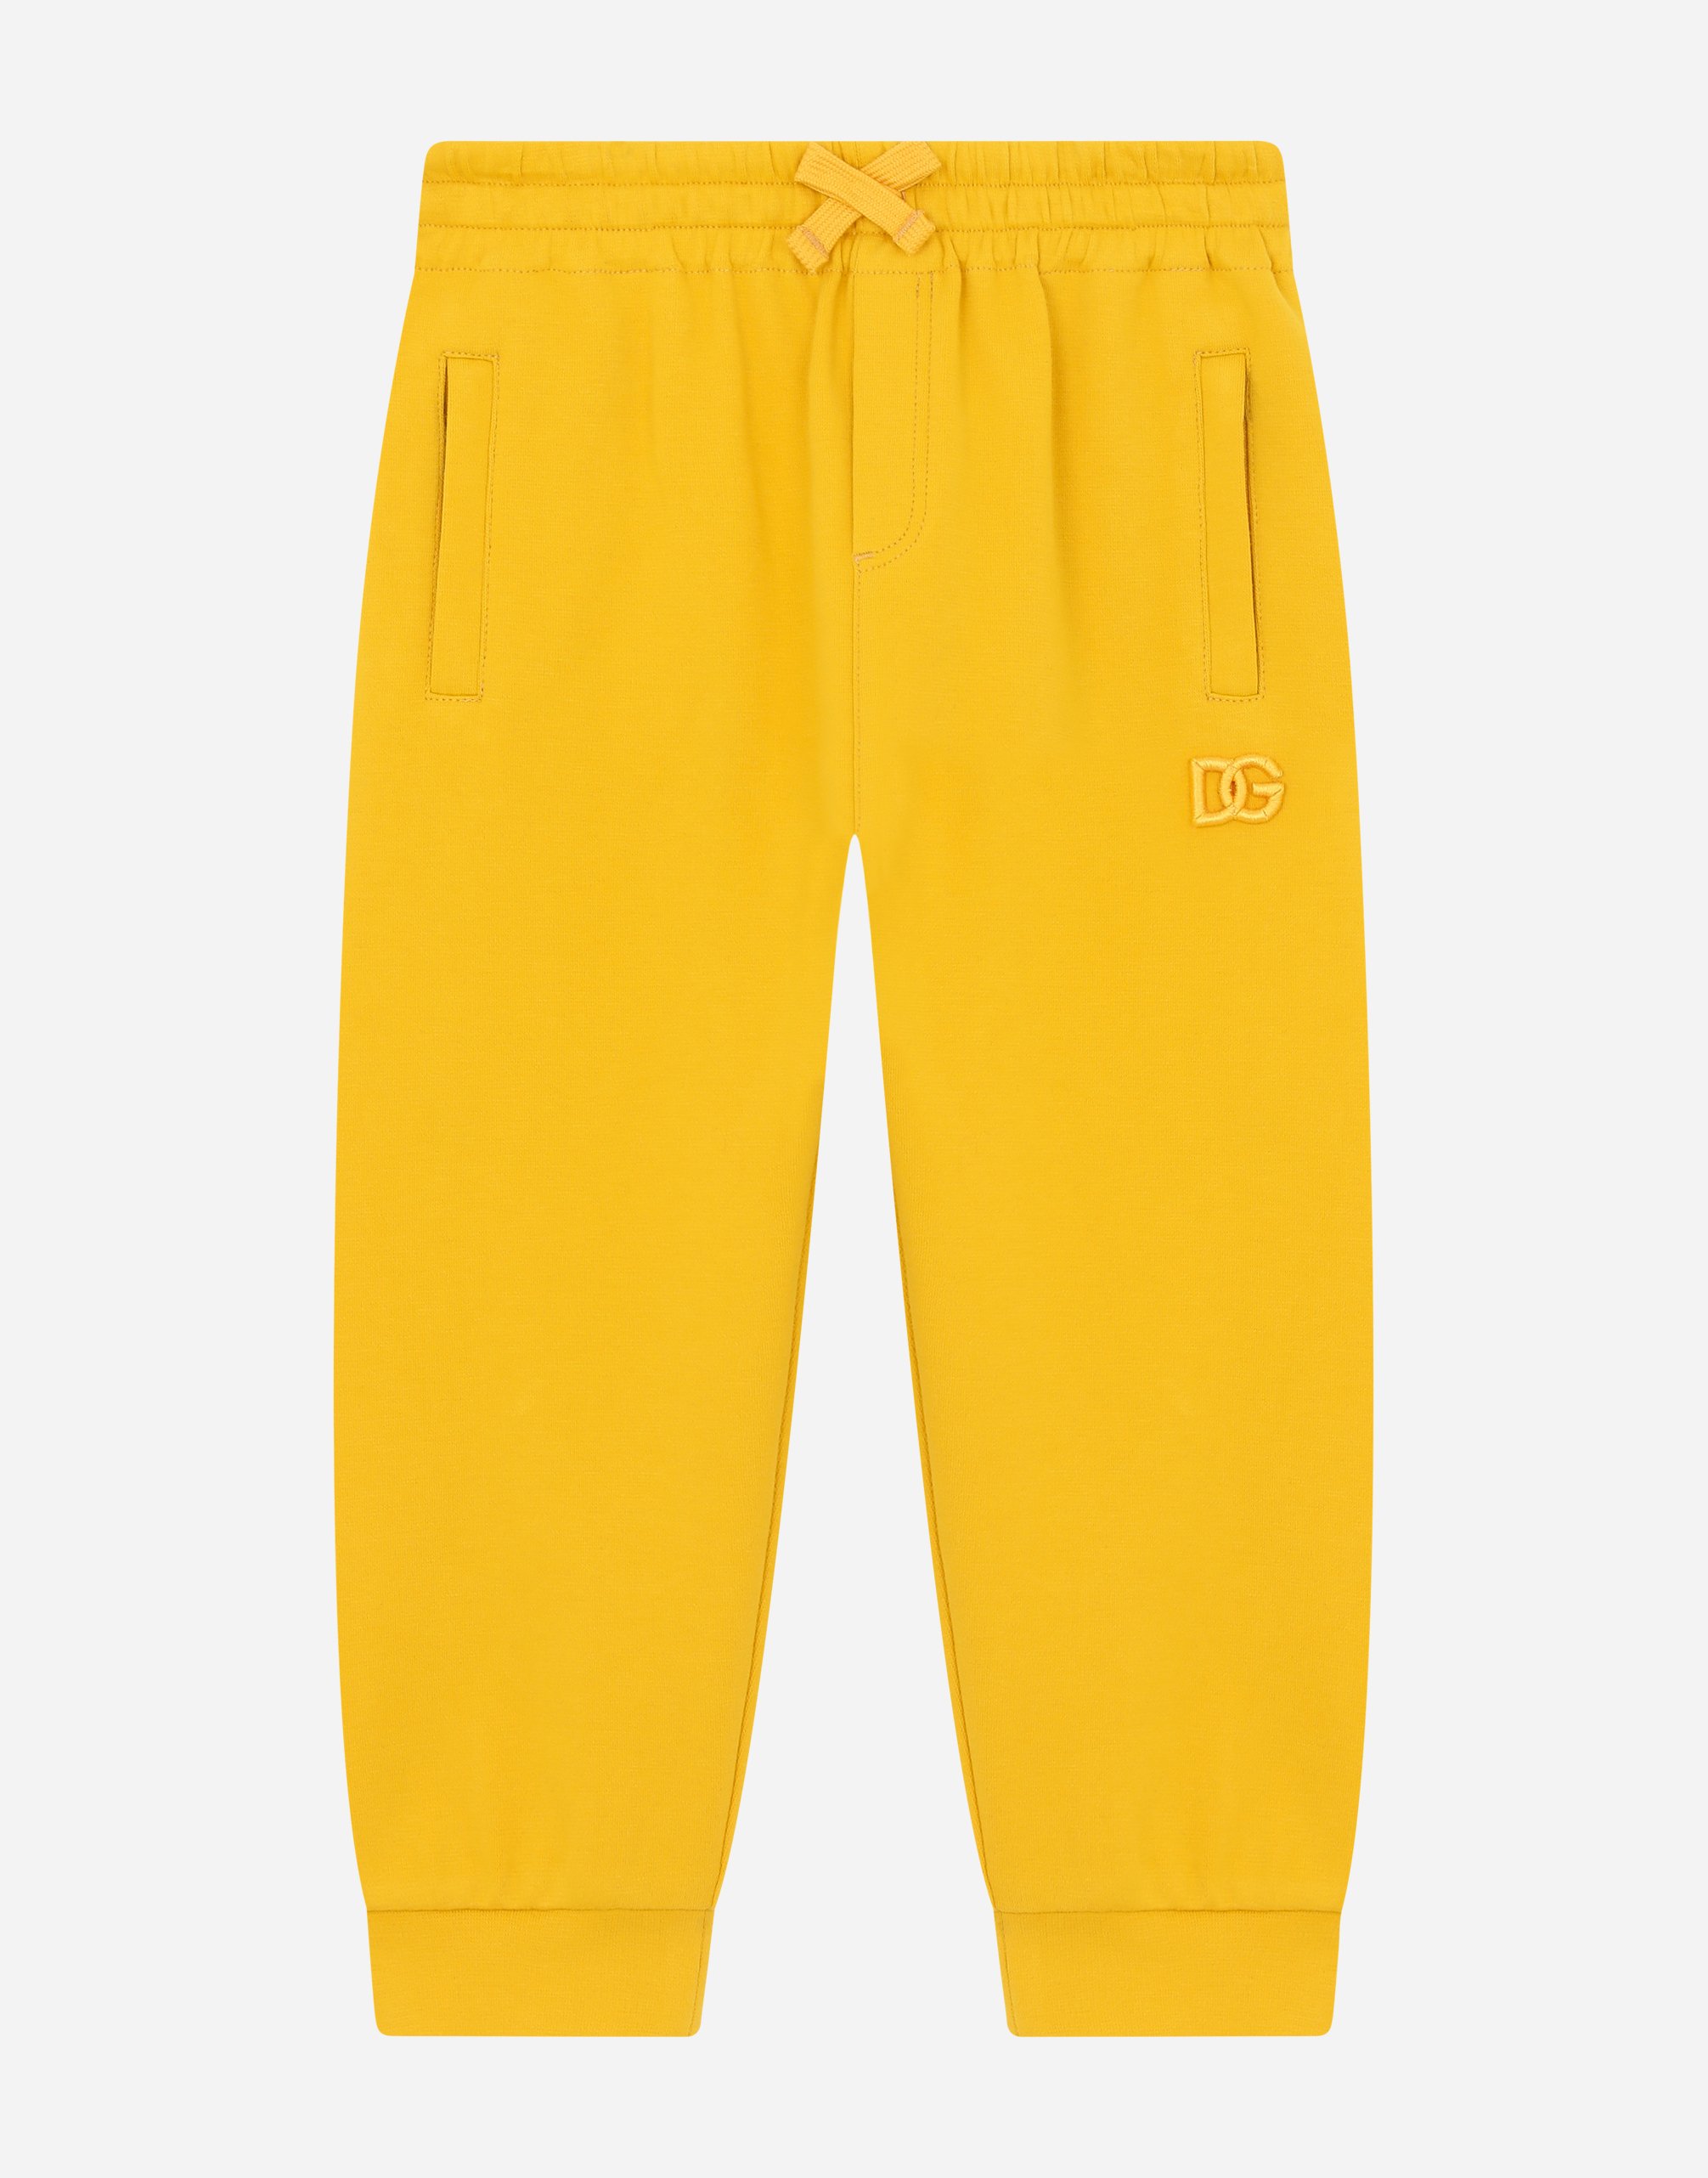 Jersey jogging pants with DG logo embroidery in Yellow